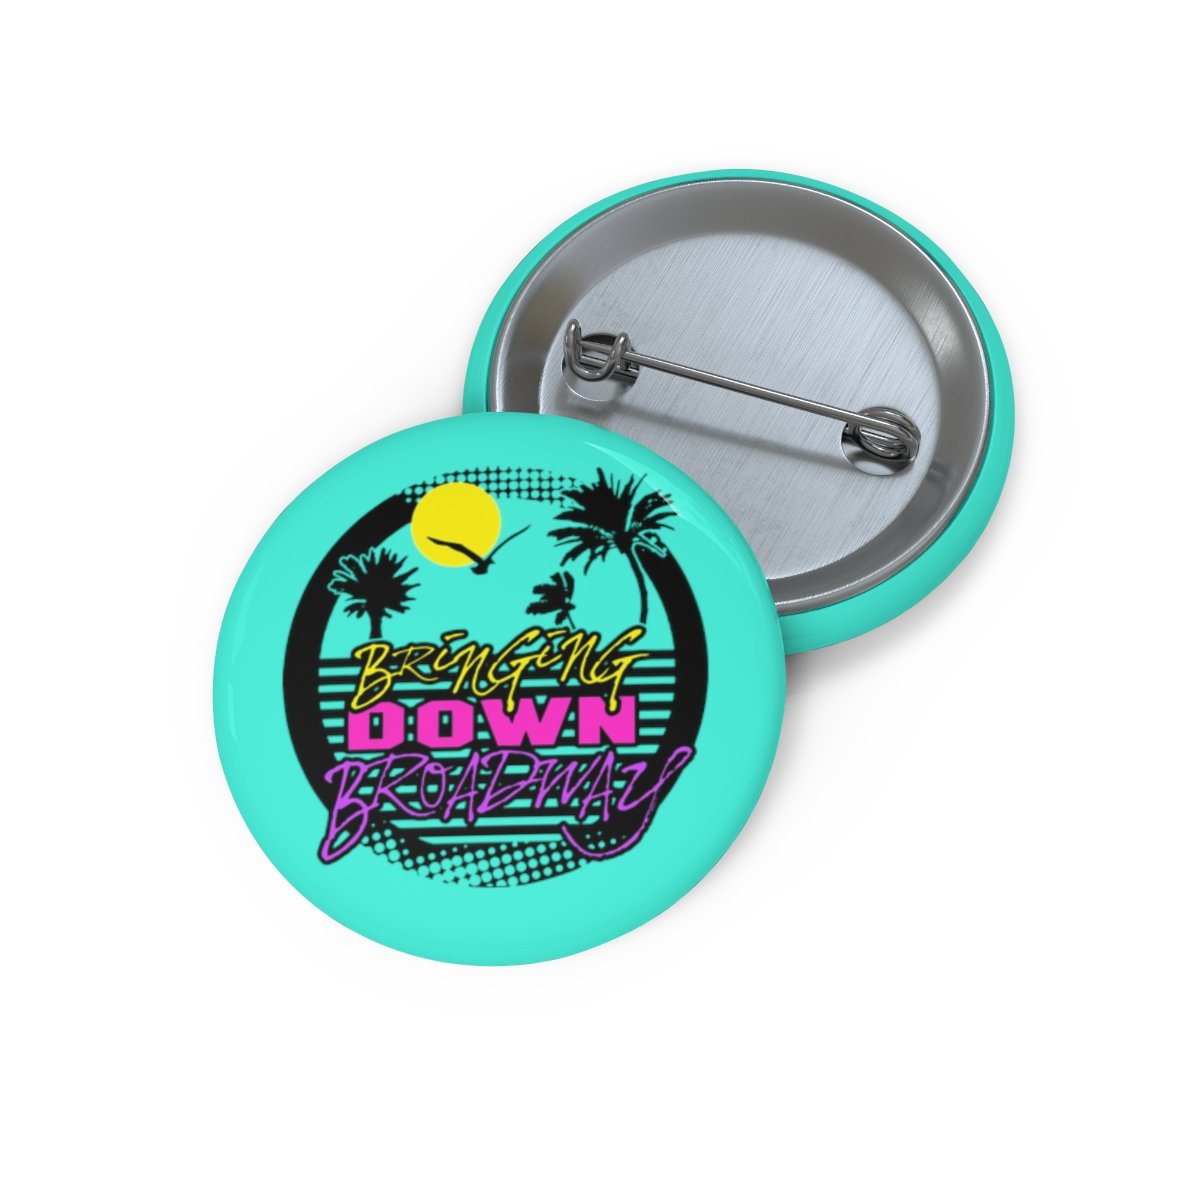 Bringing Down Broadway – Sun Pin Buttons (Teal)